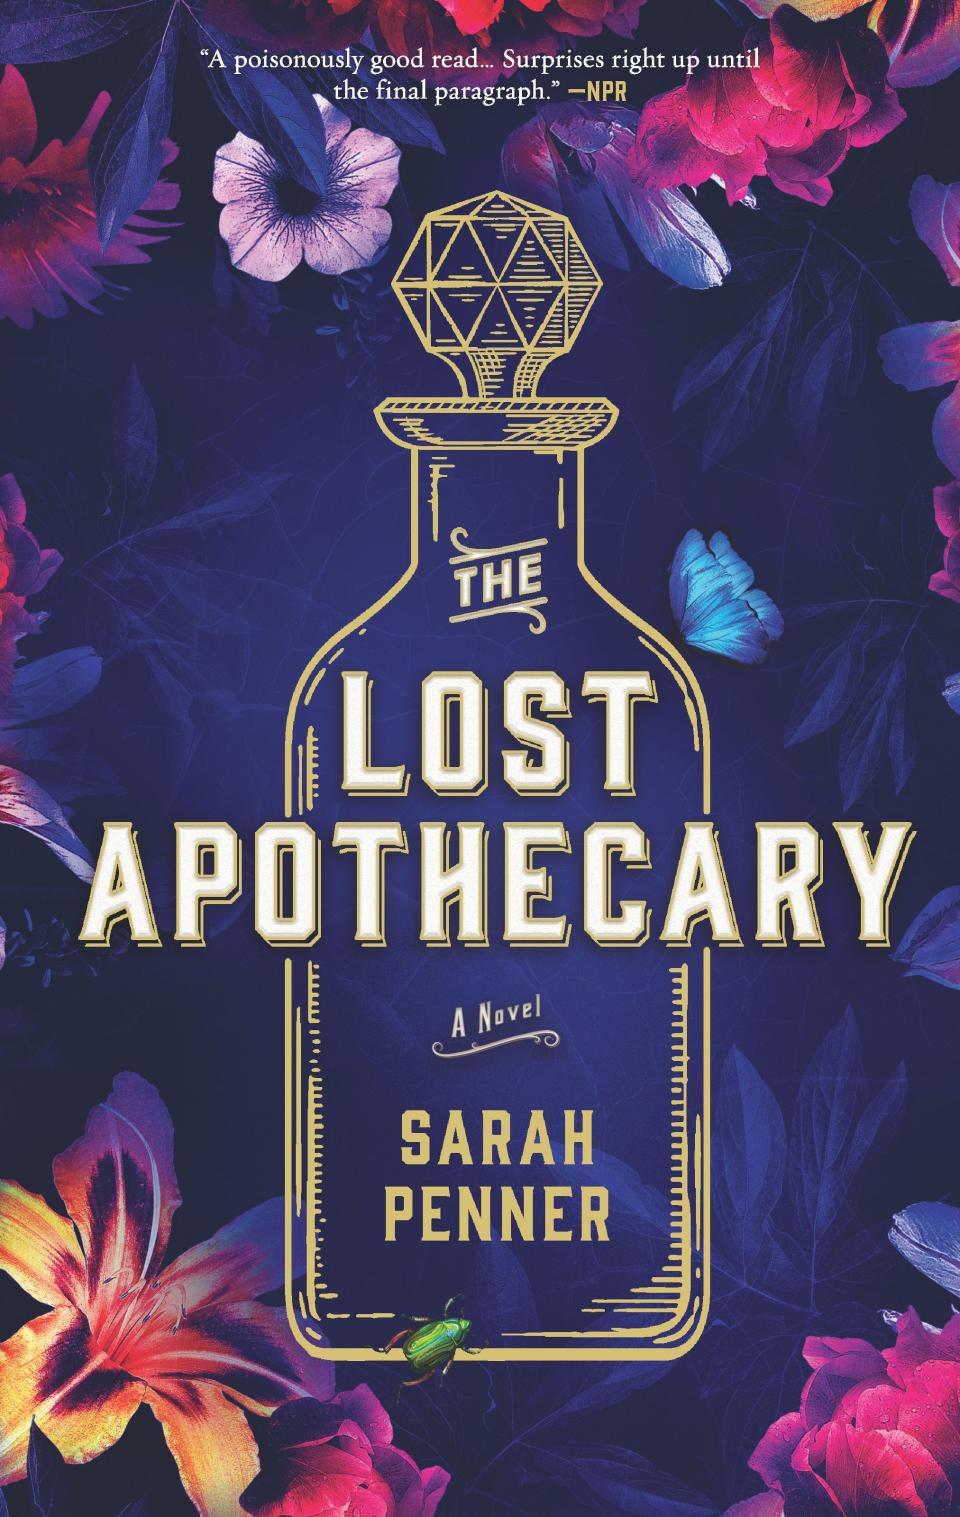 Sarah Penner, author of "The Lost Apothecary," will speak in Naples on Thursday, Nov. 3, in the Author Spotlight Event for the Friends of the Library of Collier County.